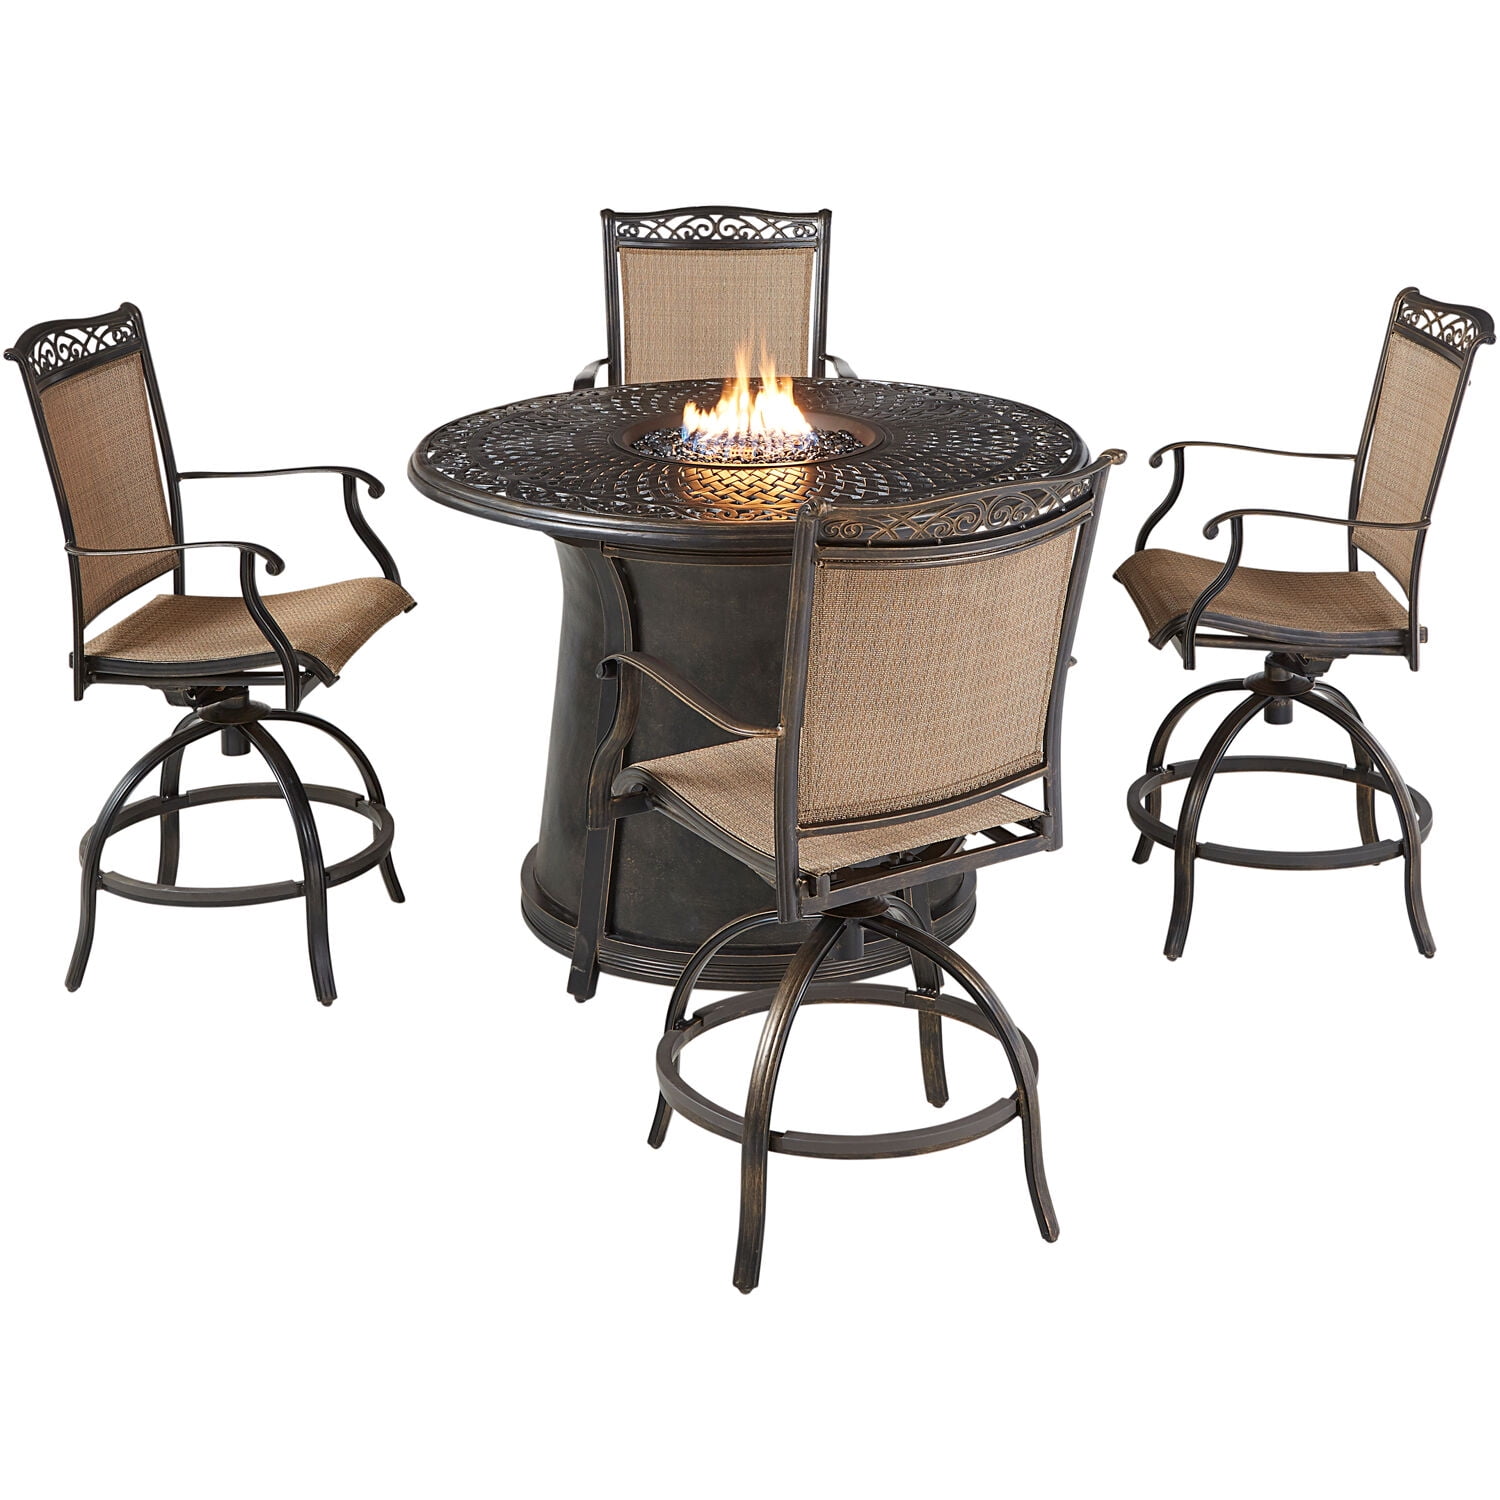 Hanover Palm Bay 4 Piece Fire Pit, Sears Fire Pit Table Set